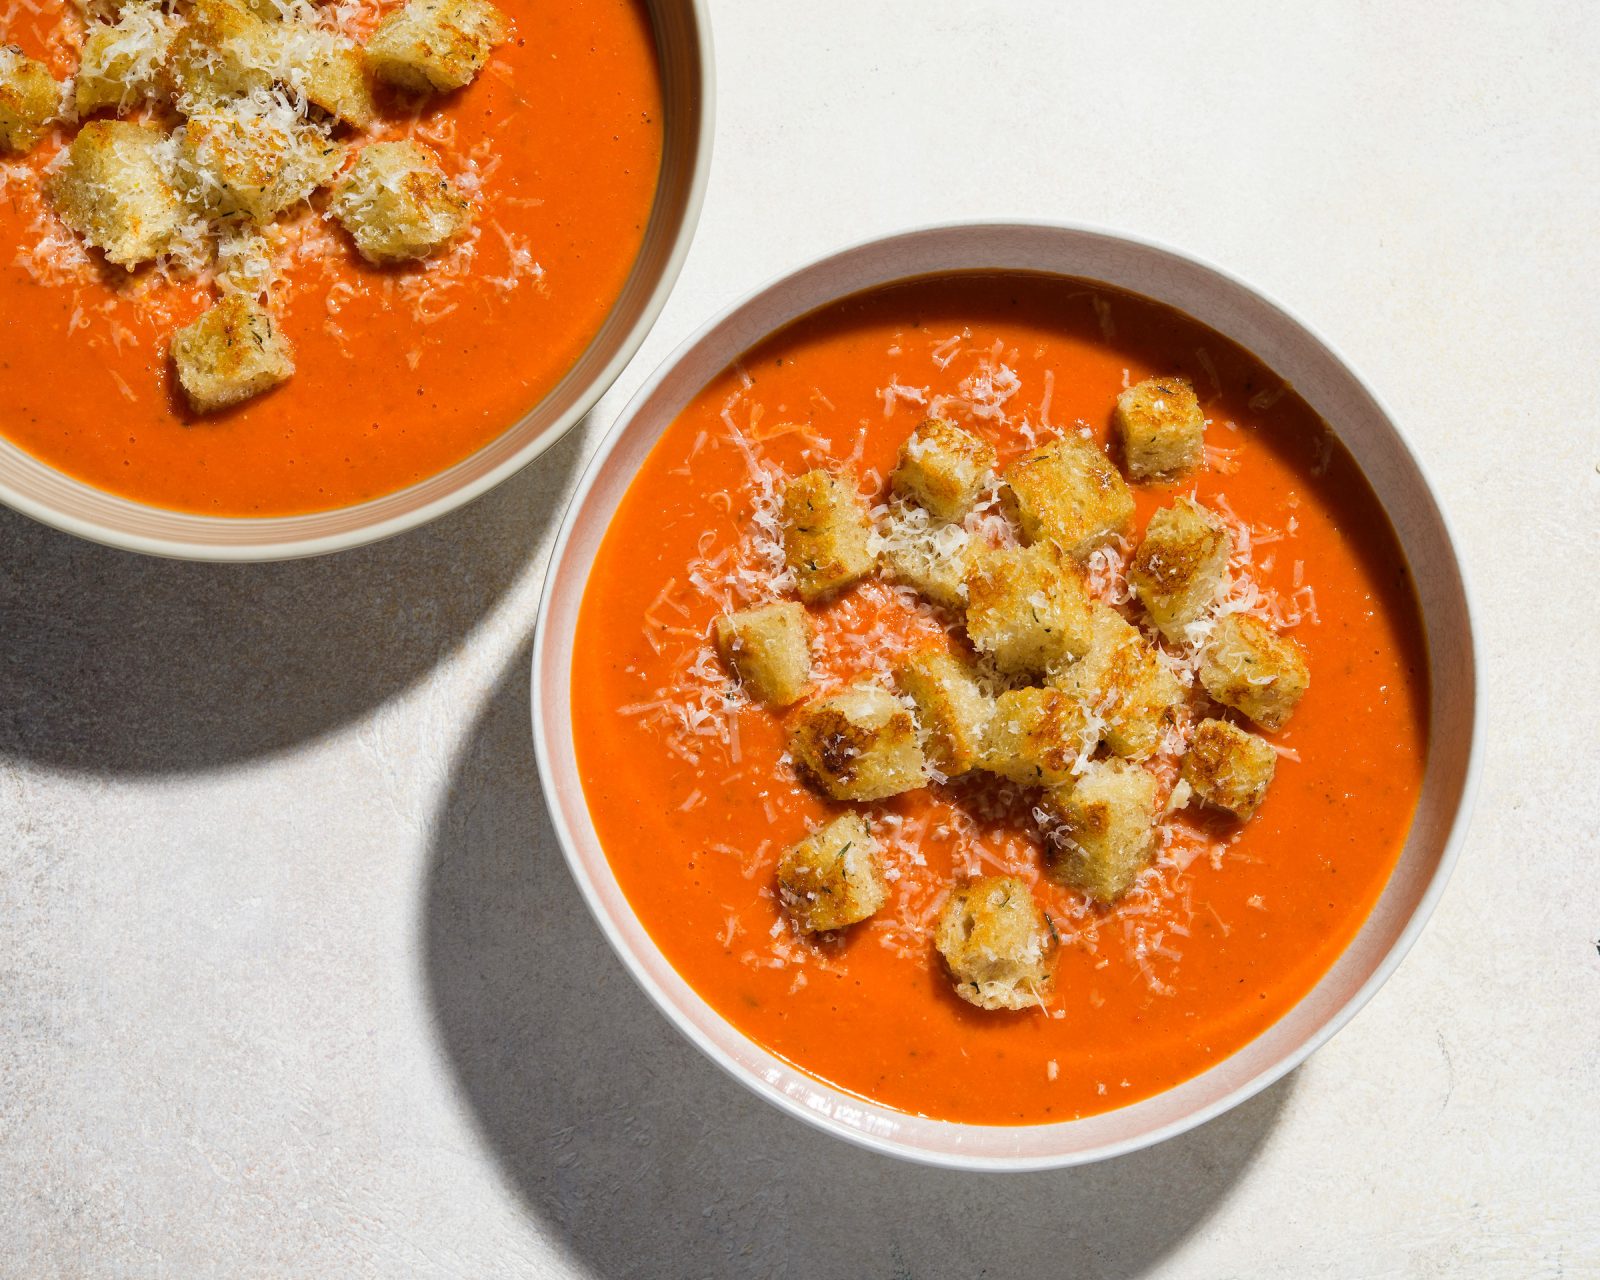 Cream-Free Tomato Bisque with Parmesan Croutons